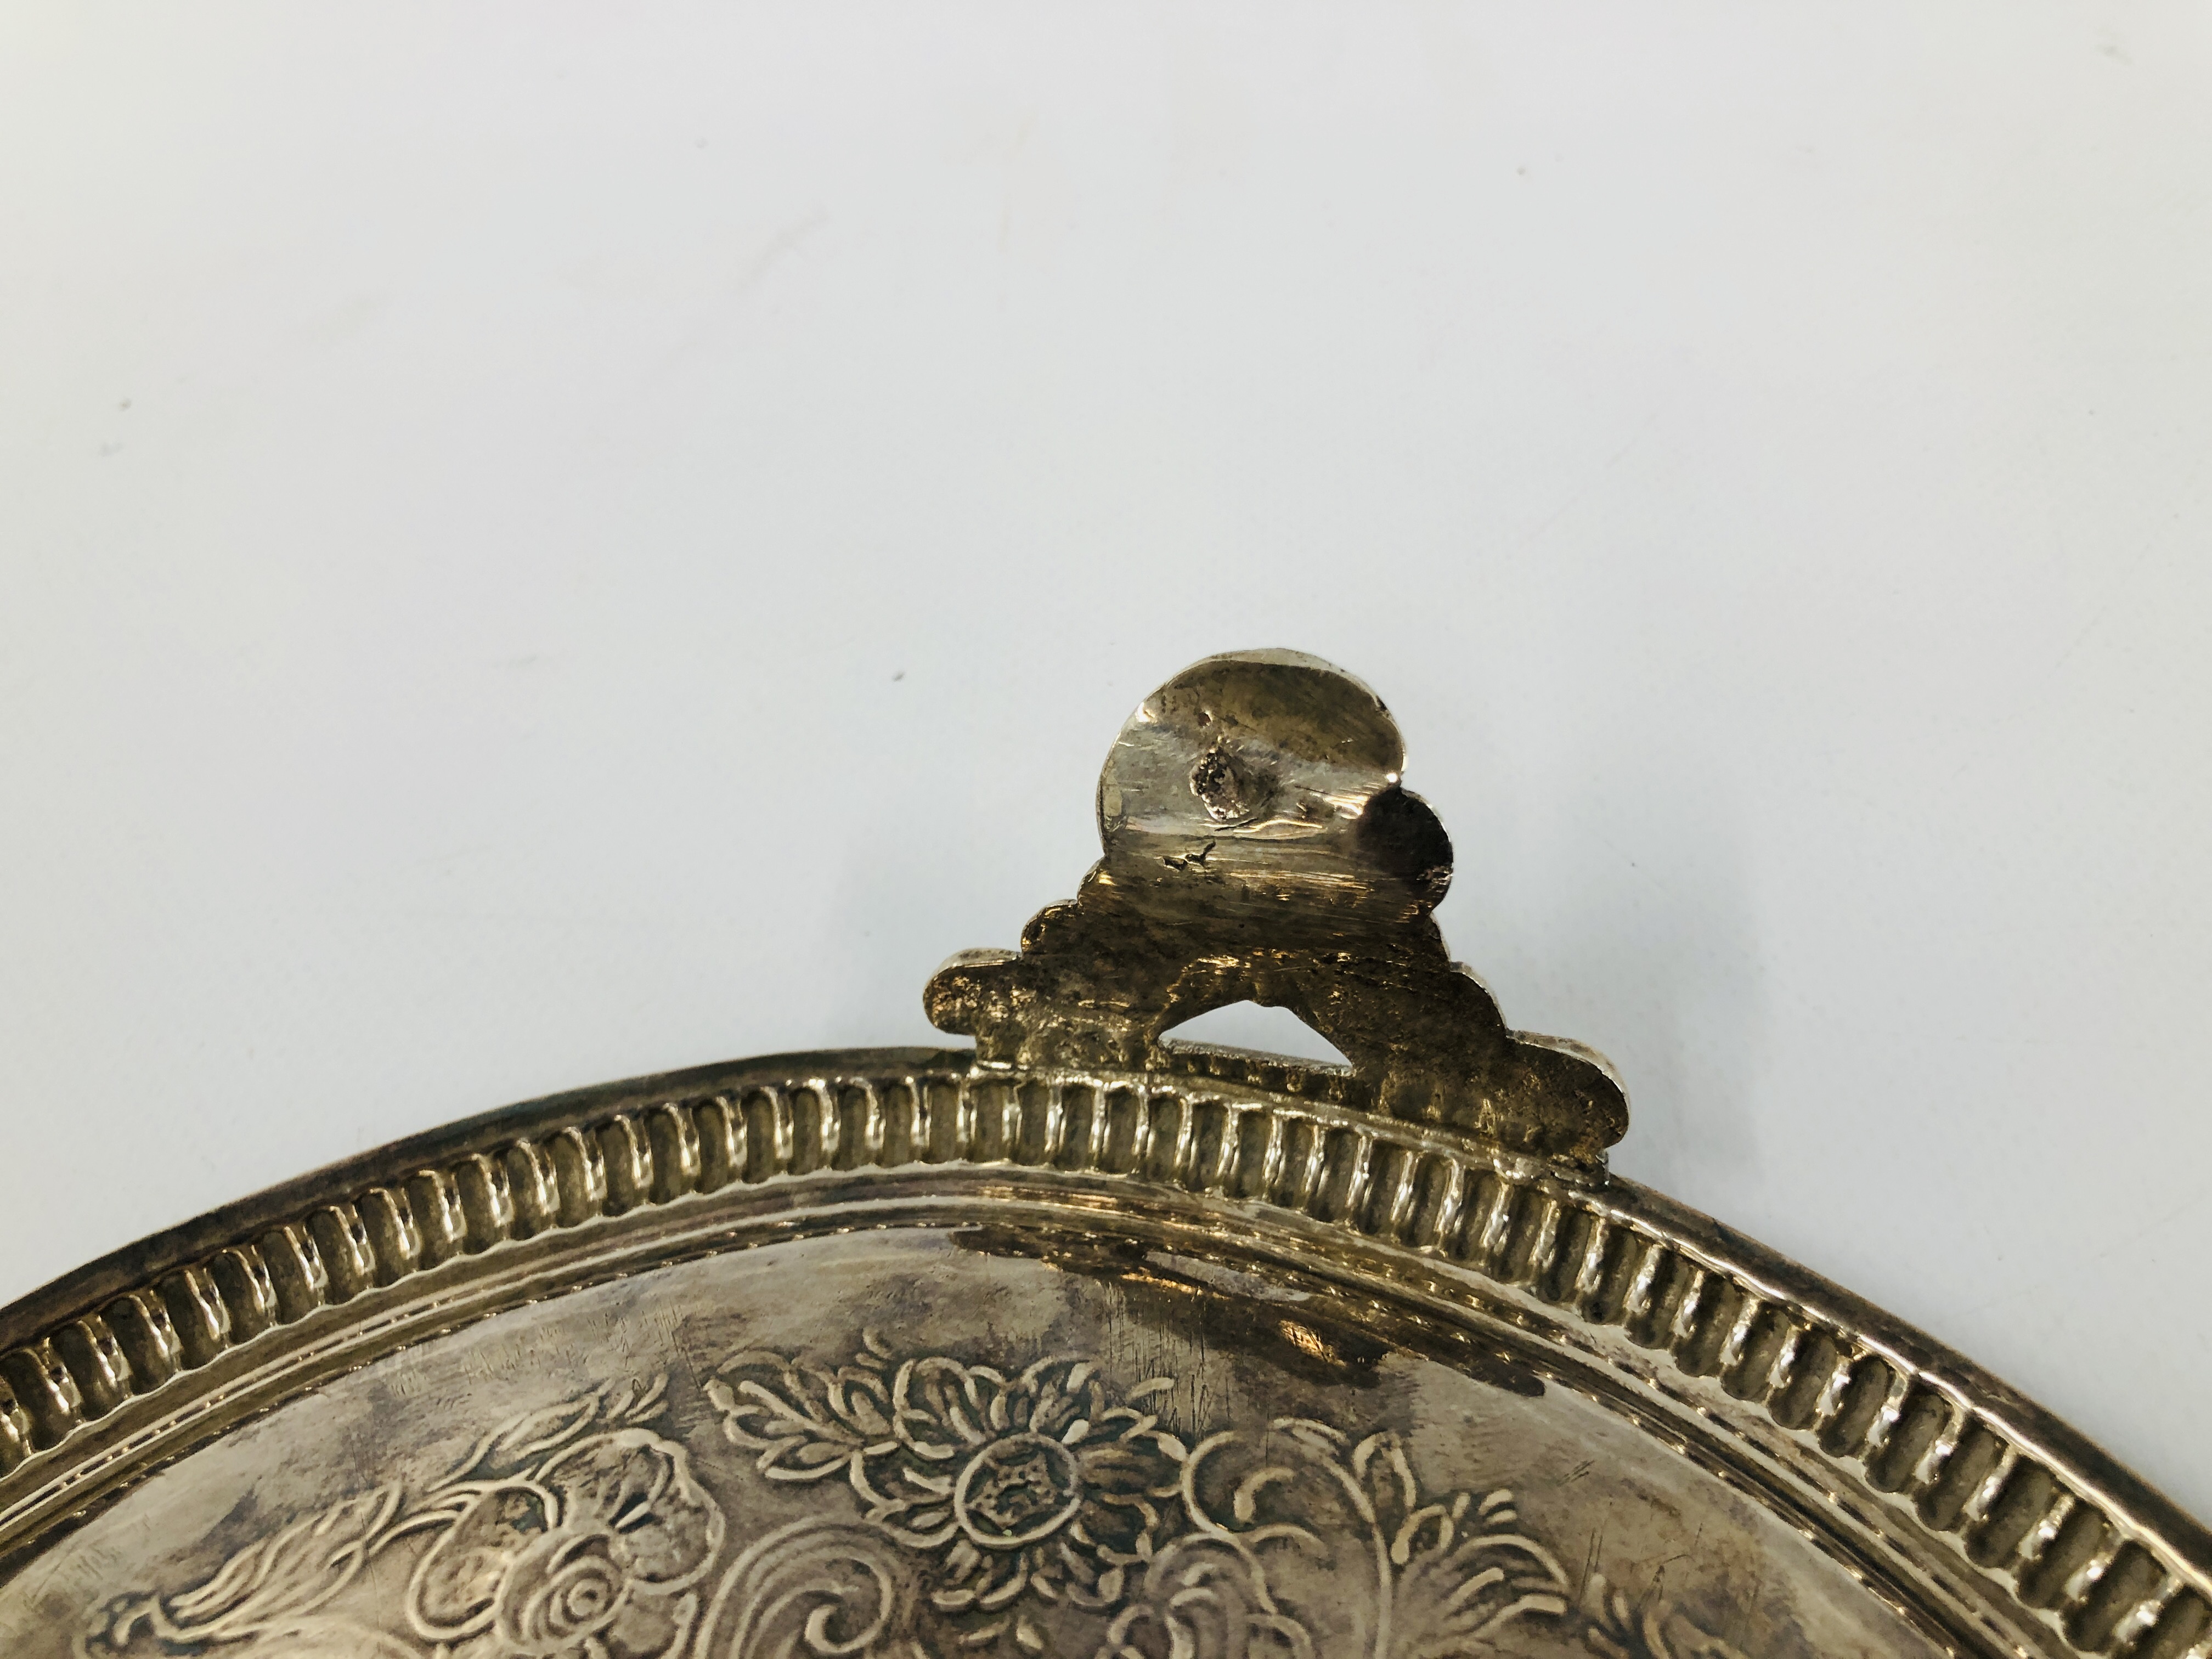 A SILVER CIRCULAR SALVER WITH NULLED RIM ON SCROLLED TRIPOD FEET BY JOESEPH WALKER OF DUBLIN C17 - Image 12 of 13